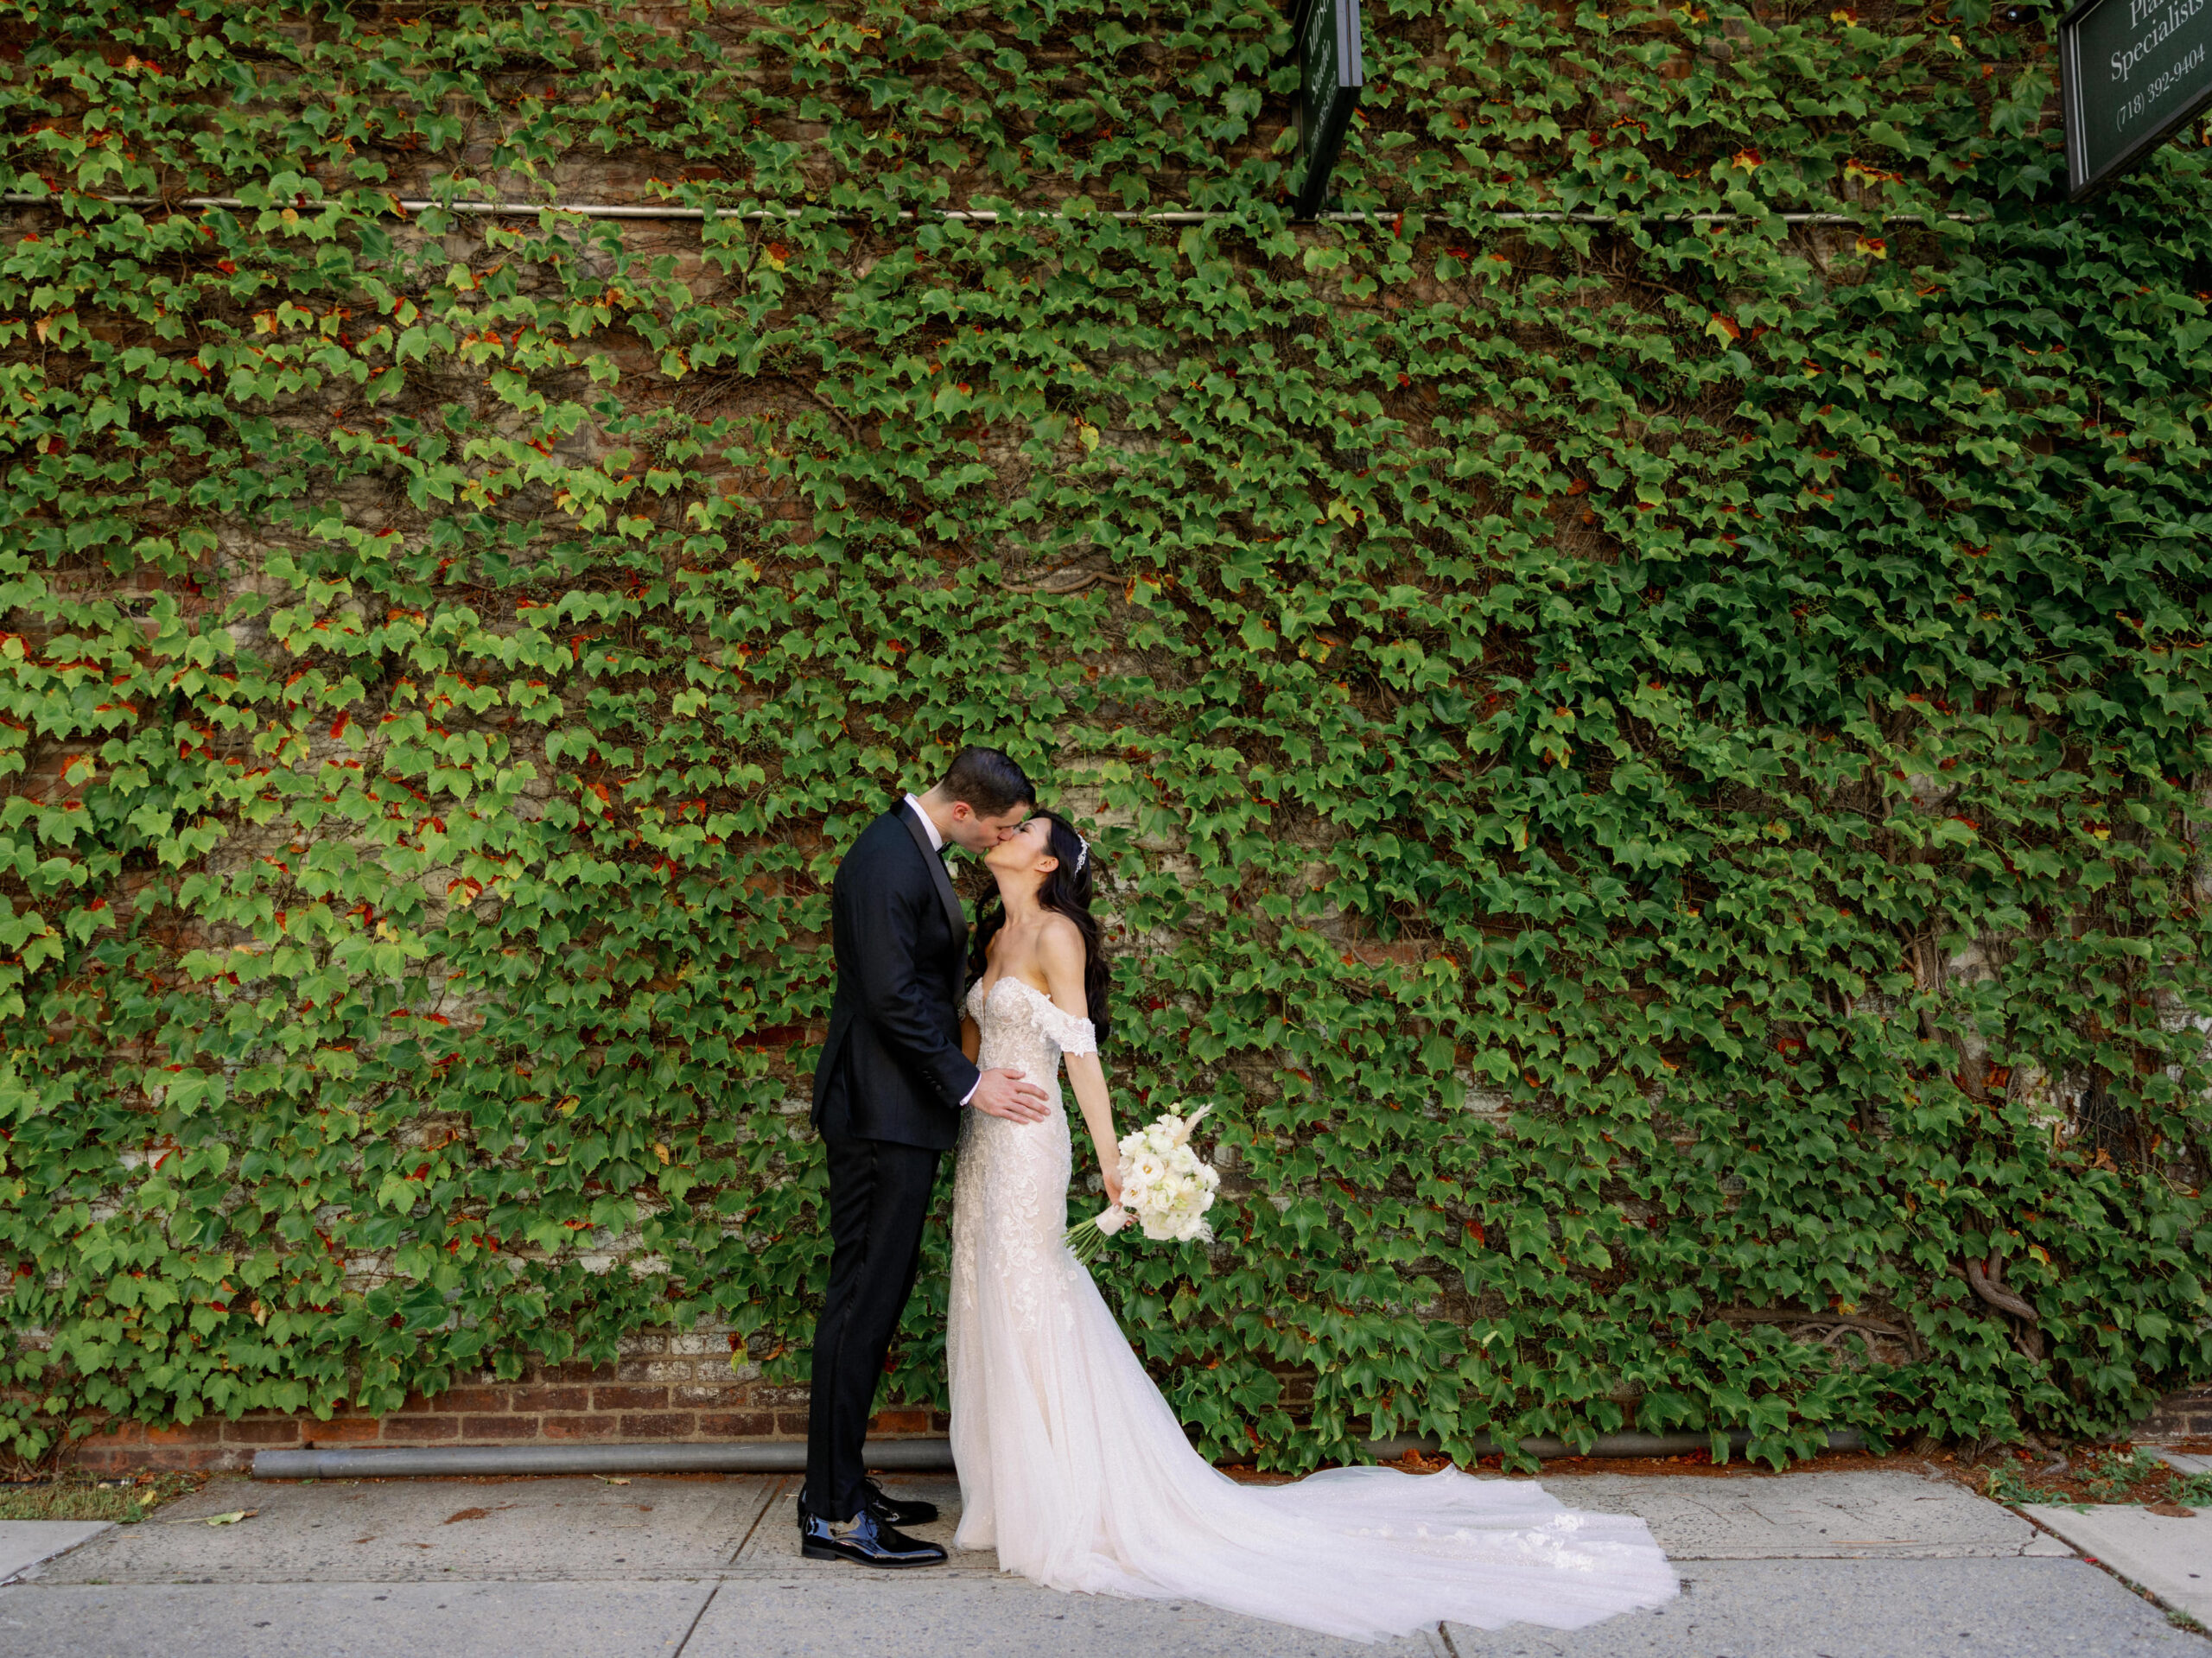 The bride and groom are kissing with ivy-covered wall in the background. Image by Jenny Fu Studio 